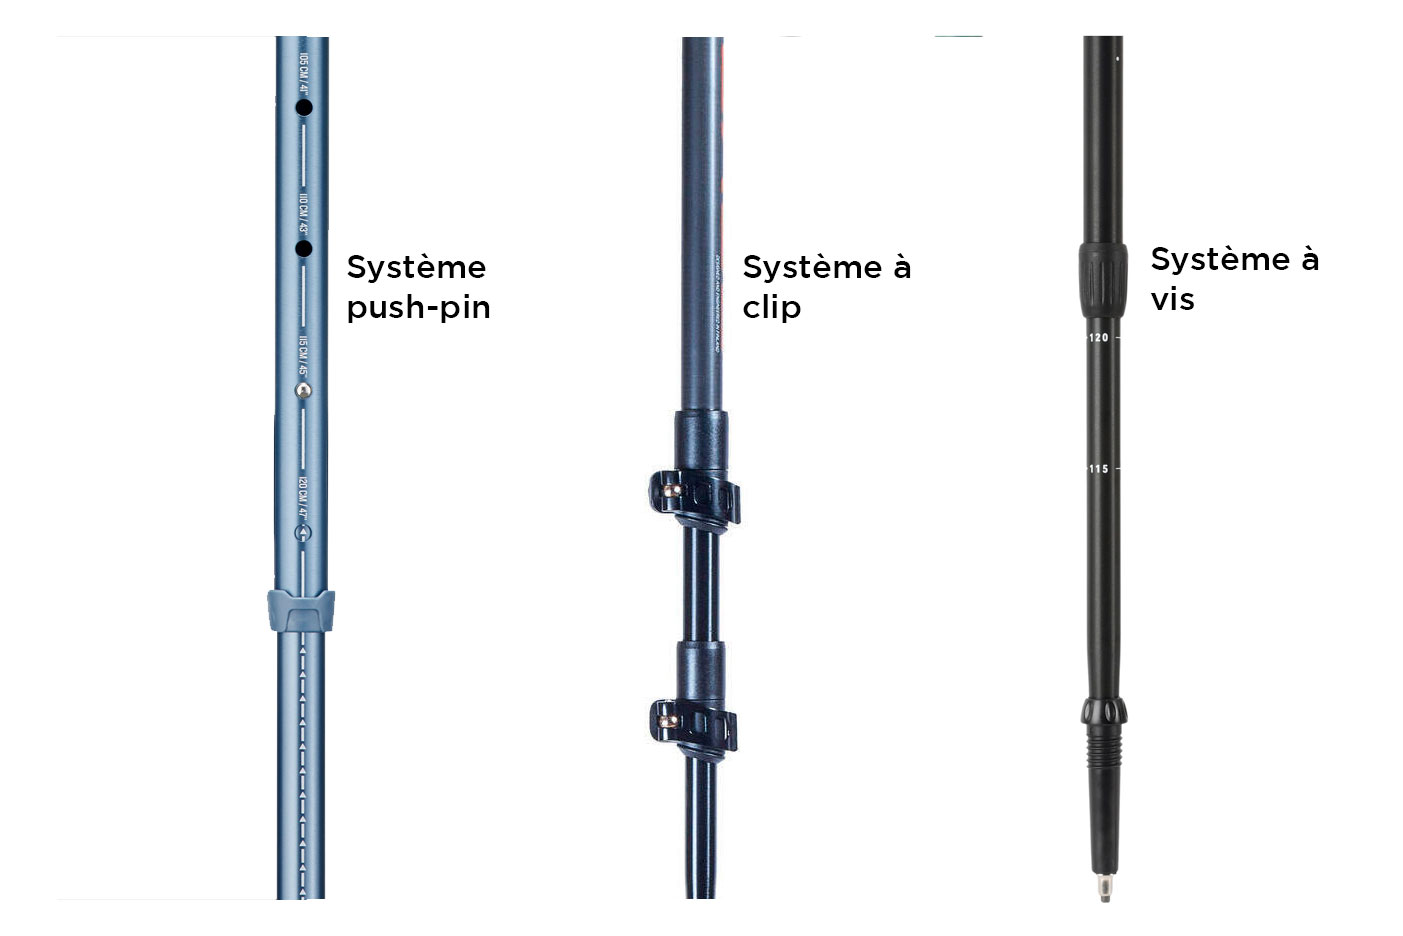 Clamping systems for walking poles